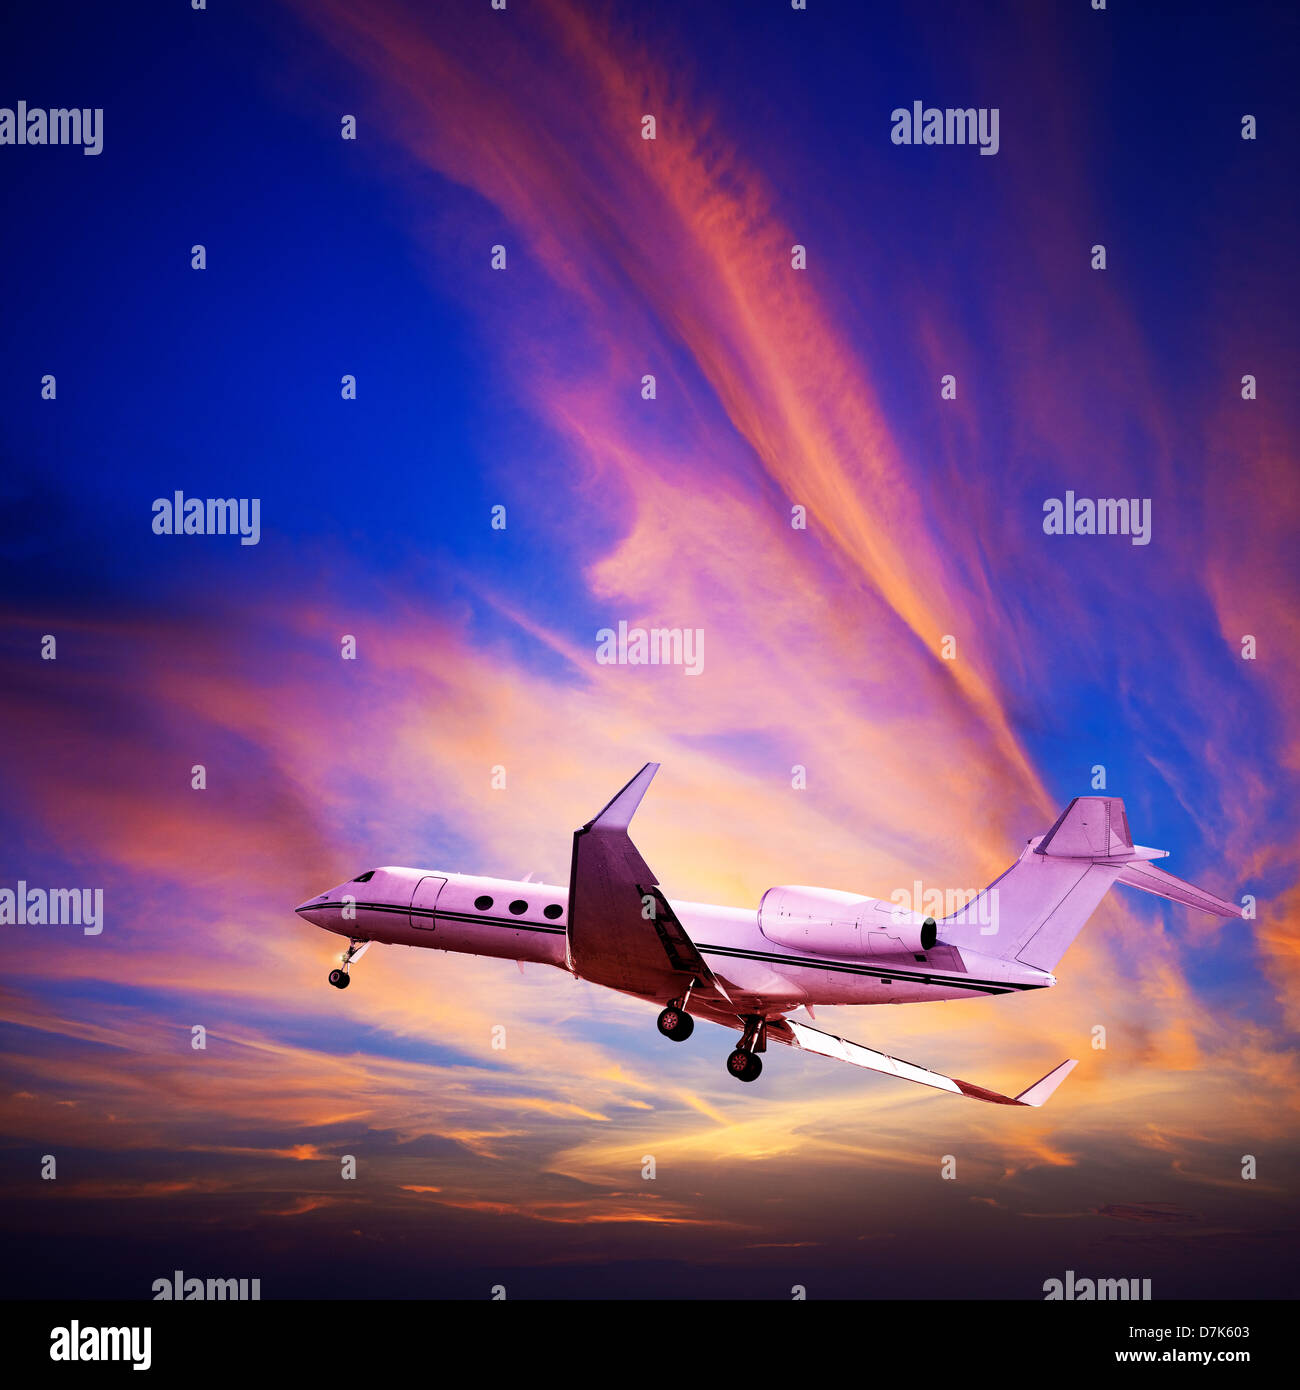 Private jet maneuvering in a spectacular sunset sky. Square composition. Stock Photo